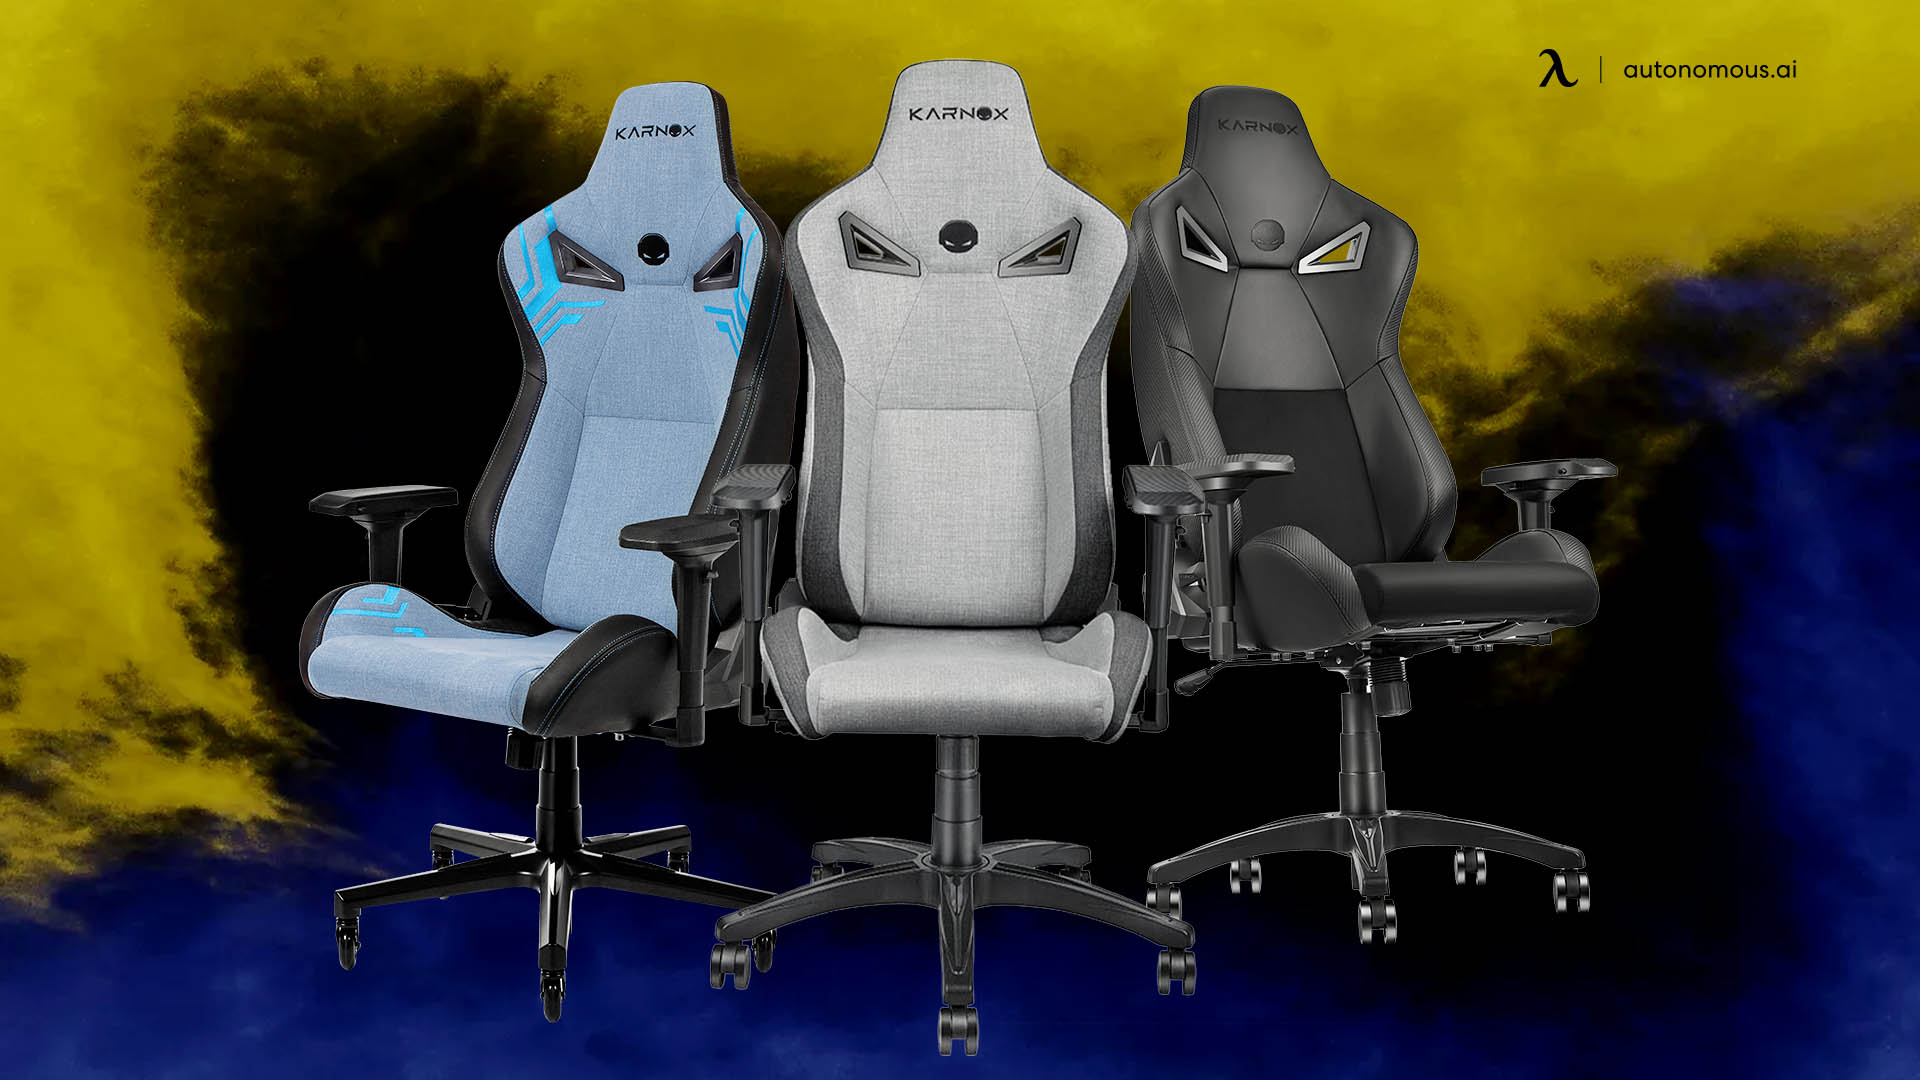 Overview of the Karnox Gaming Chair